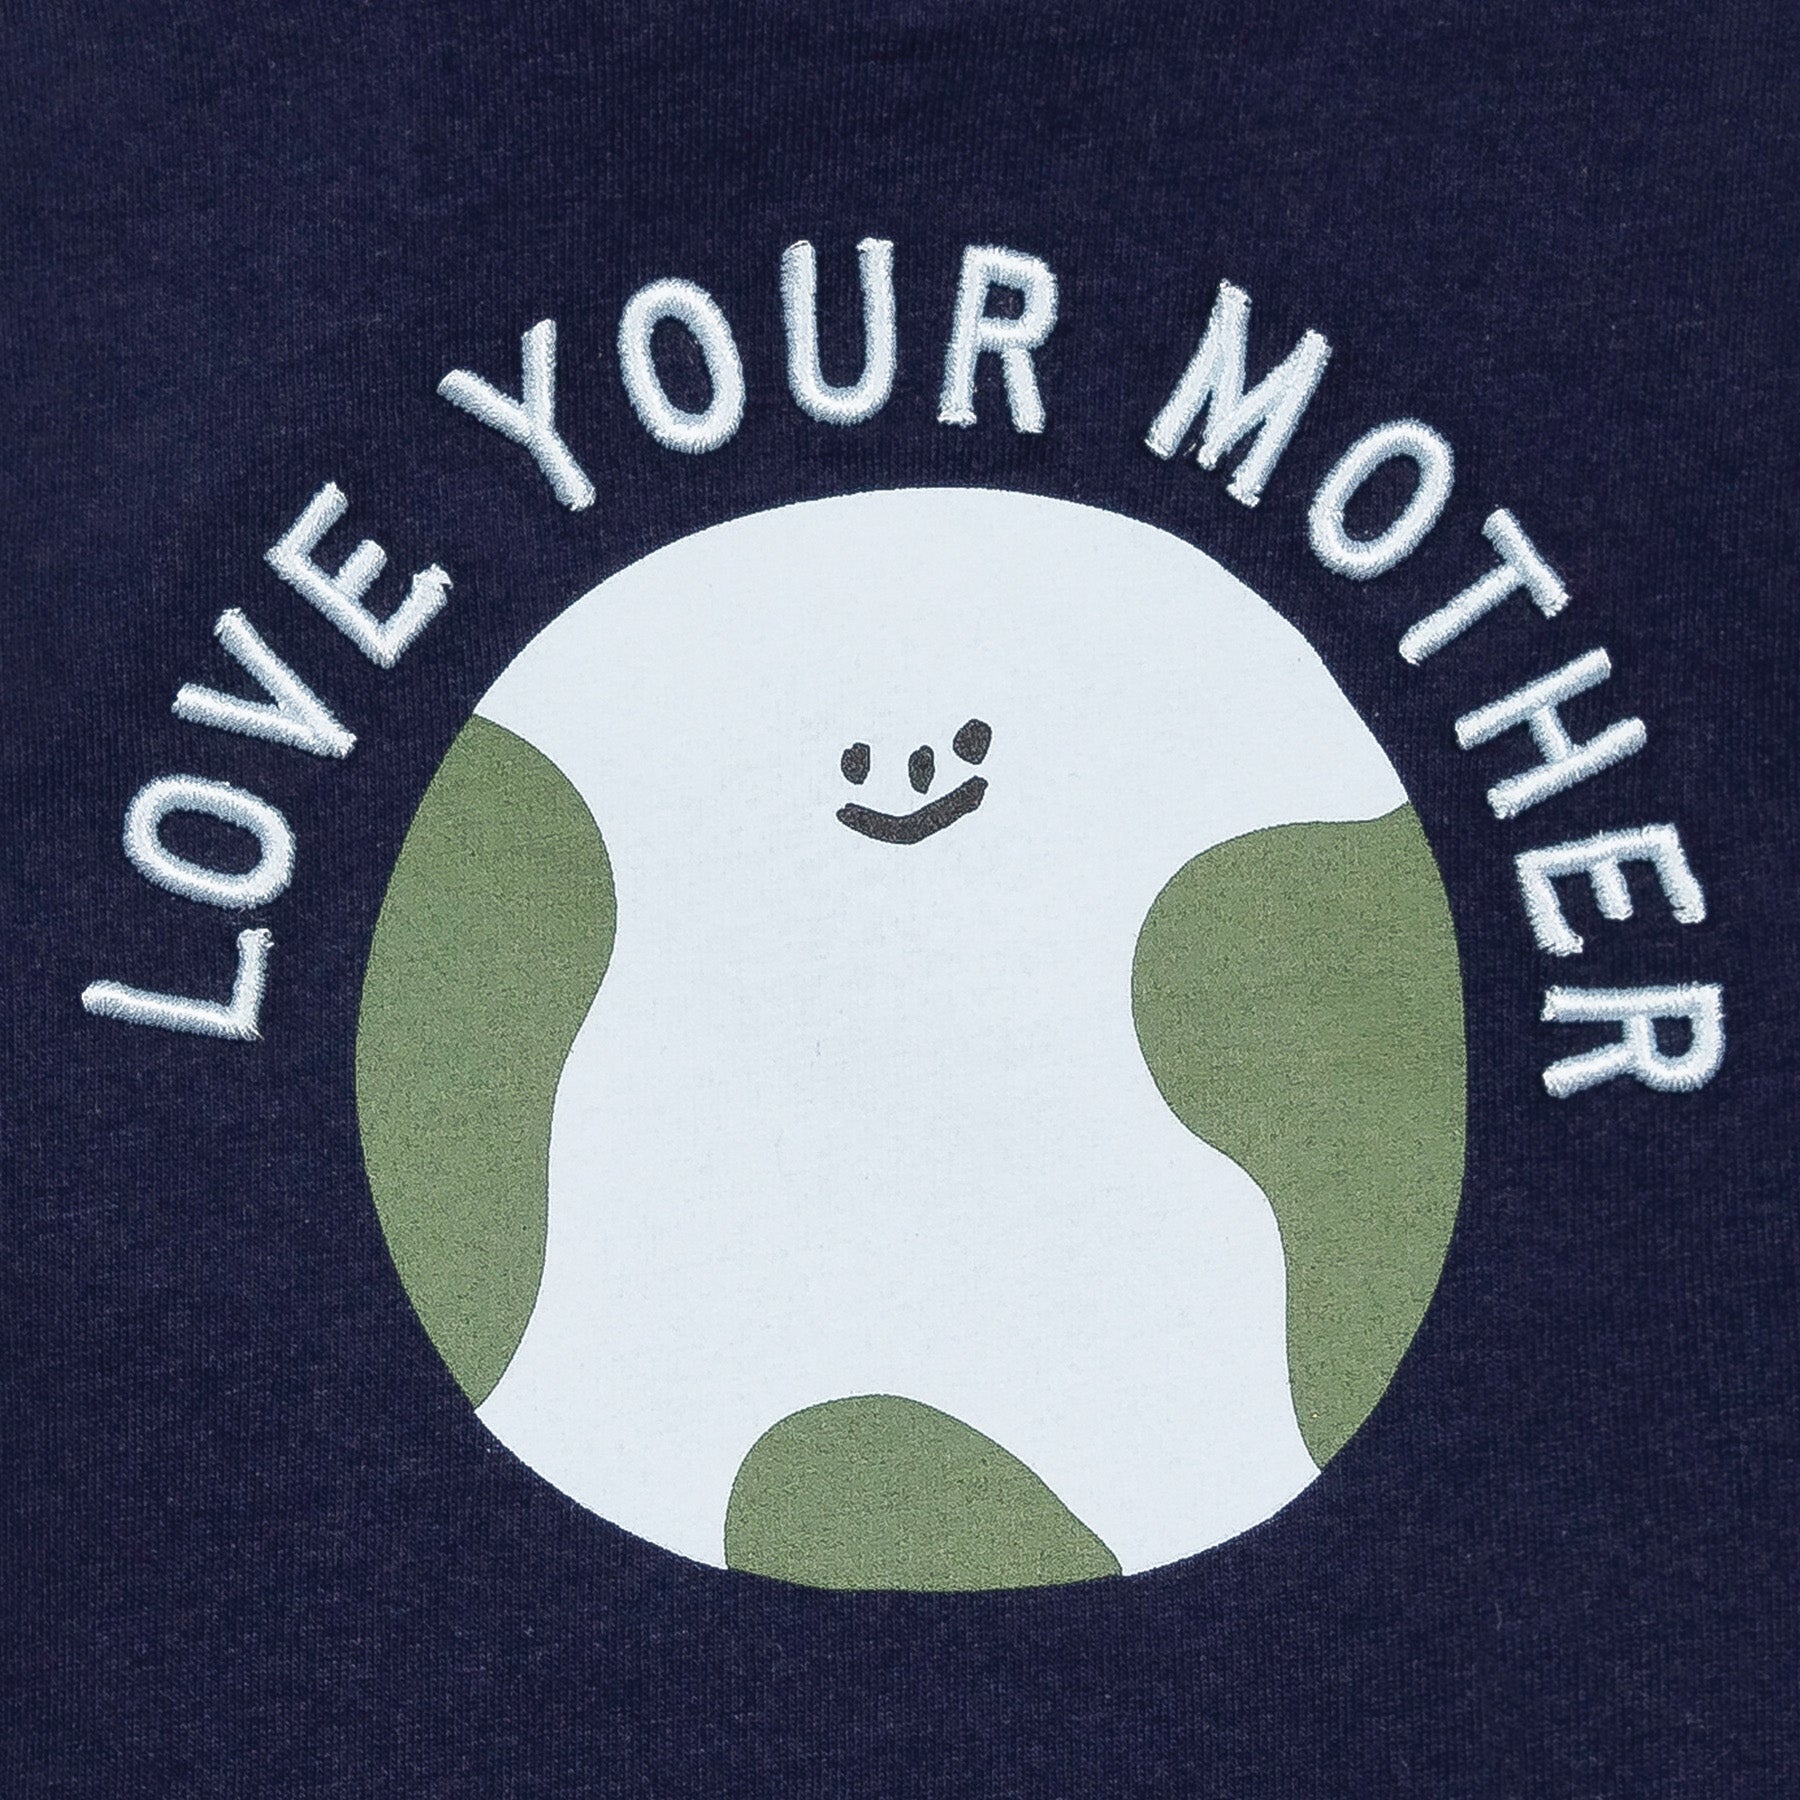 Love Your Mother Earth Kid Tshirt 